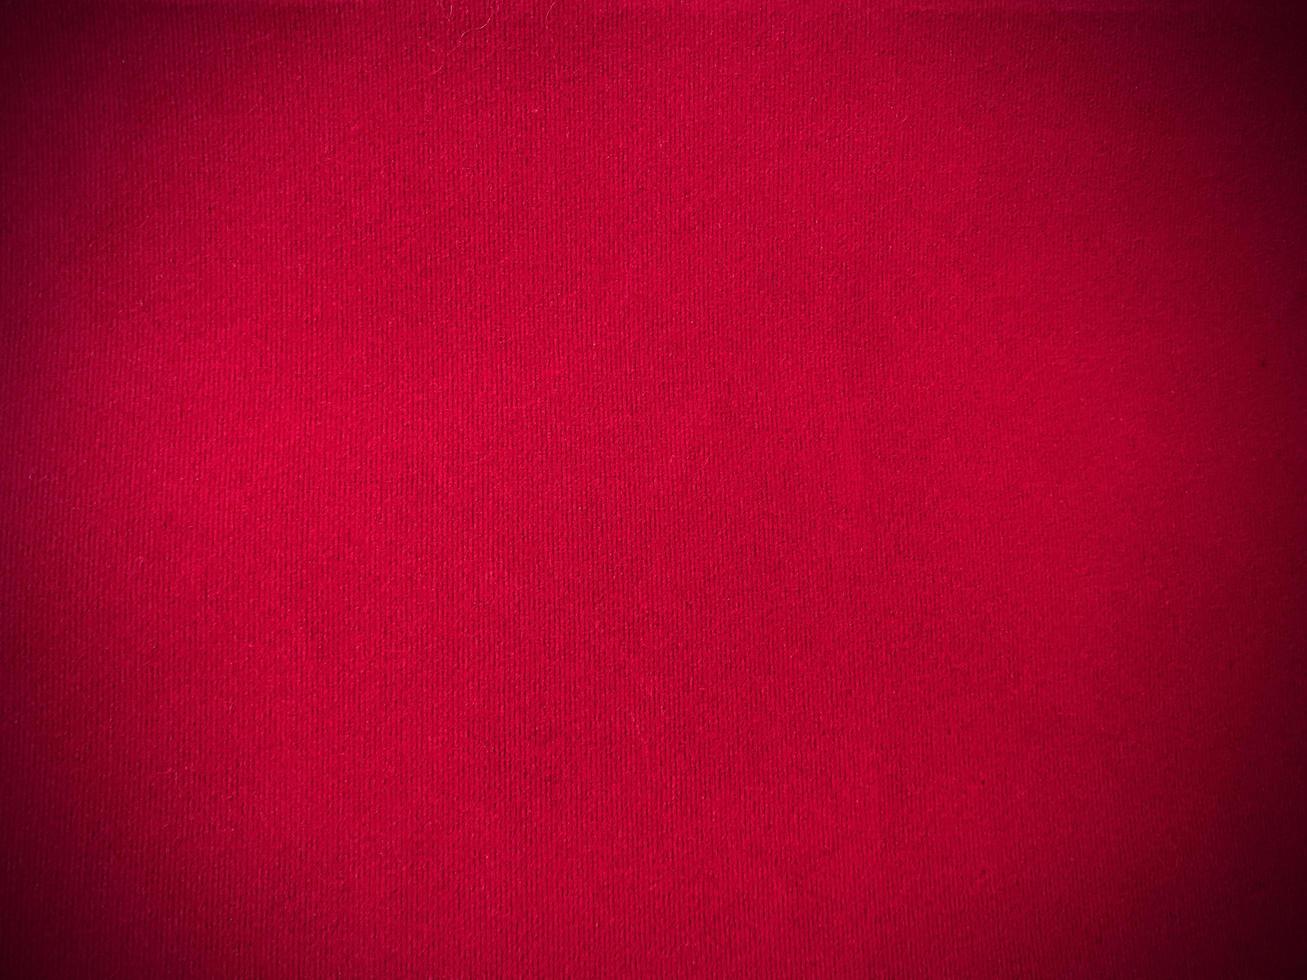 Red velvet fabric texture used as background. Empty red fabric background of soft and smooth textile material. There is space for text. photo